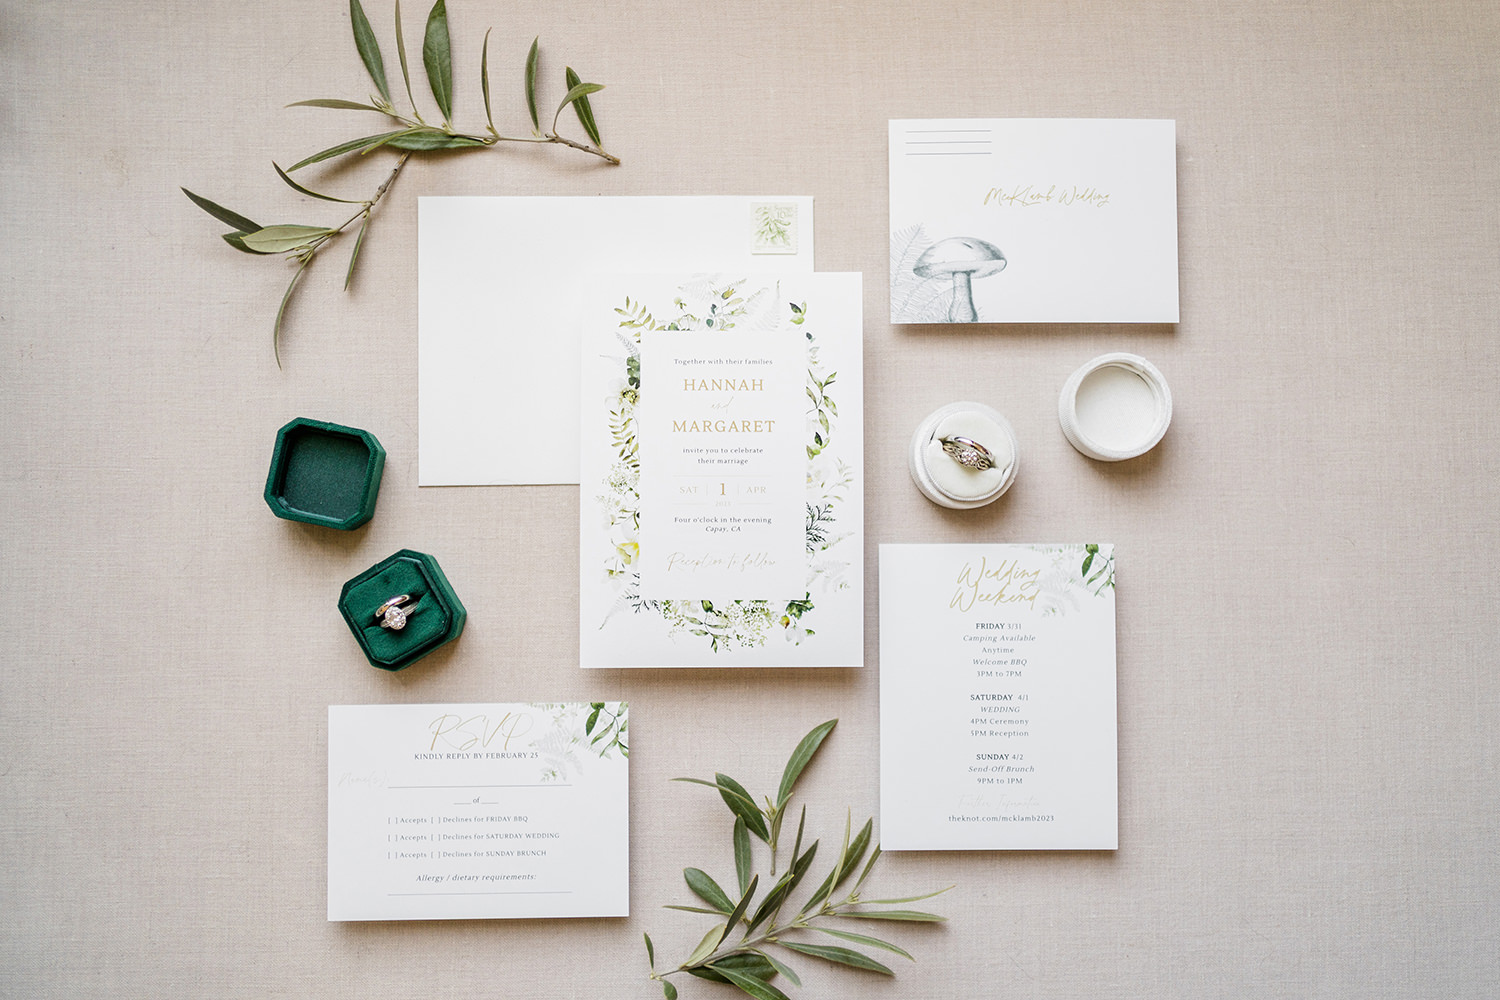 a wedding invitation at an lgbtq private estate capay wedding by Adrienne and Dani Photography